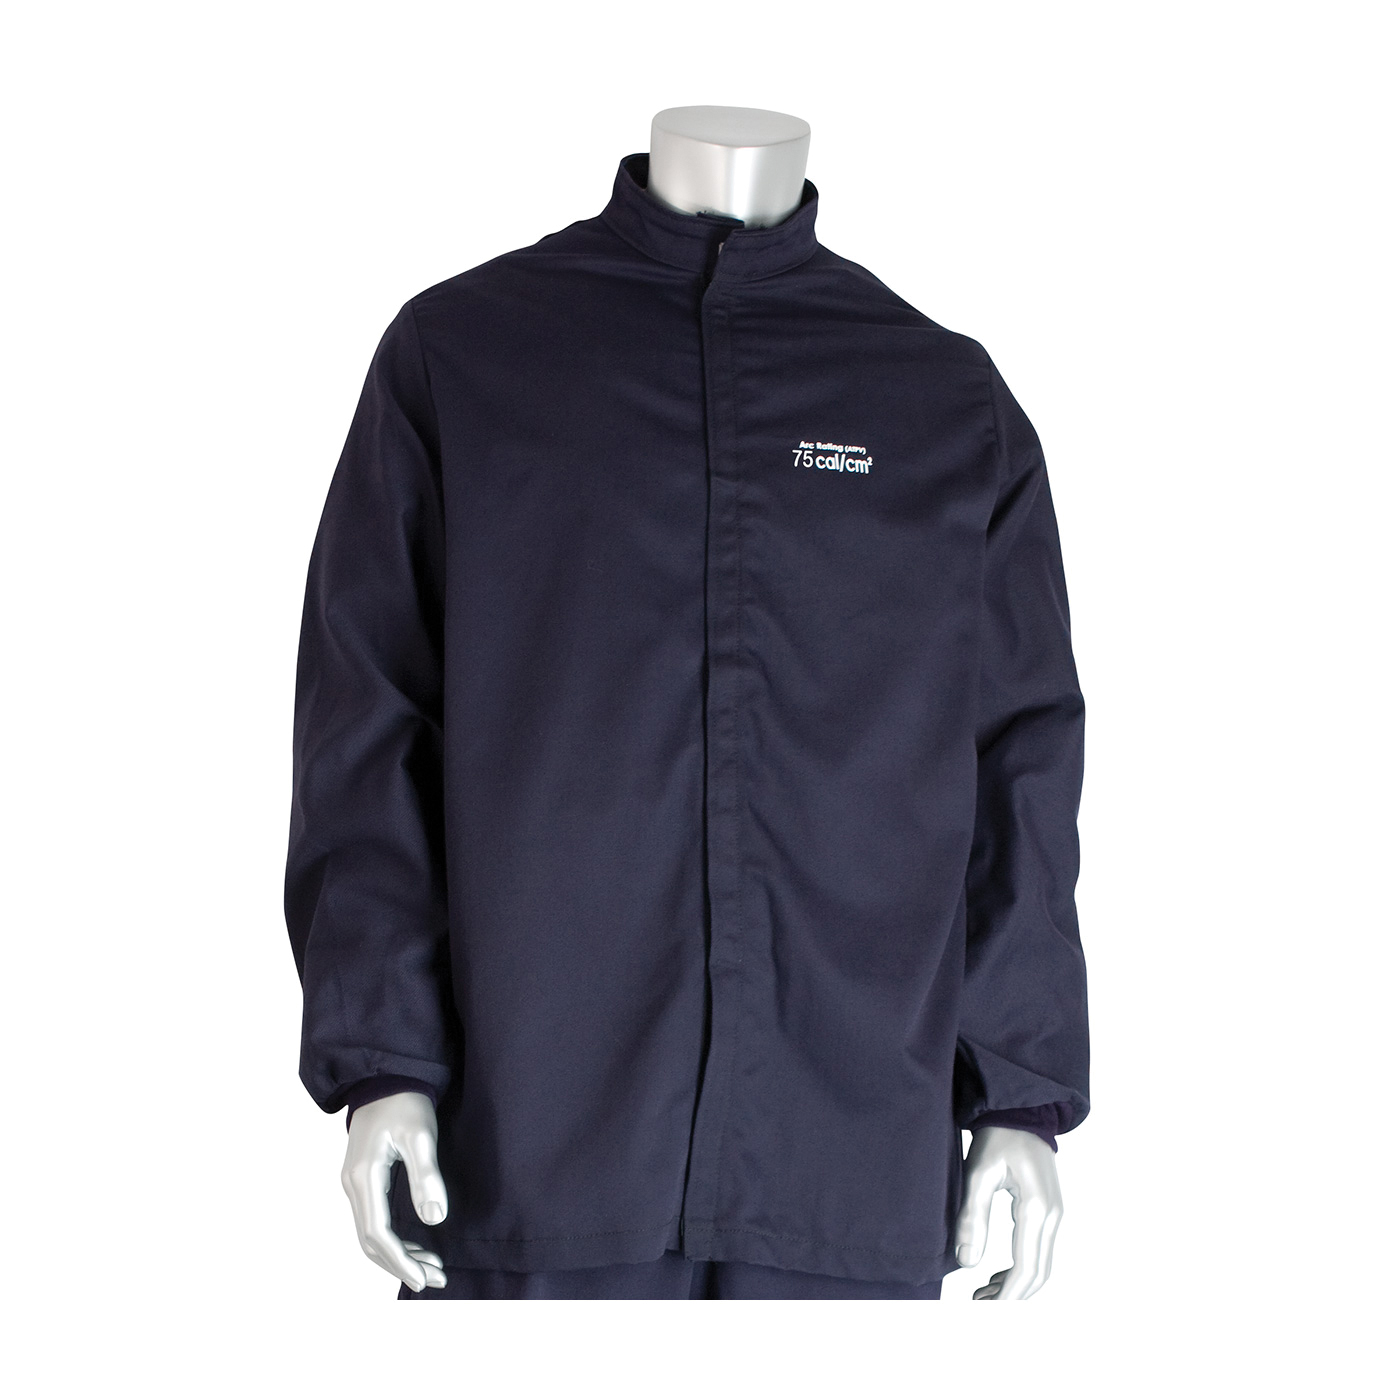 PIP® 9100-75000/M Arc and Flame Resistant Jacket, M, Navy, Westex® UltraSoft® 88% Cotton 12% High Tenacity Nylon, 40 to 42 in Chest, Resists: Arc and Flame, ASTM F1506-10a, ASTM F2178-12